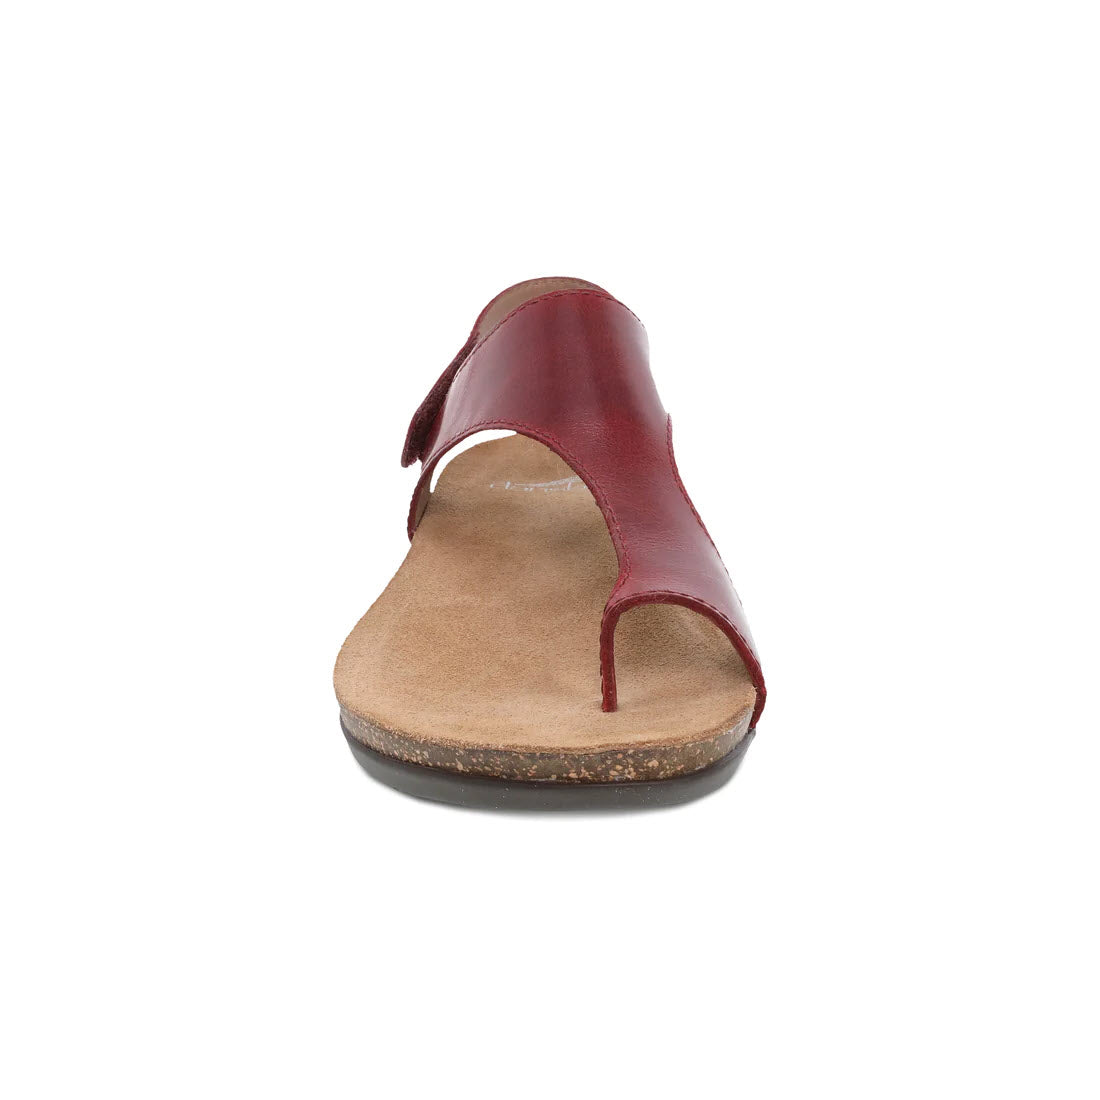 A single Dansko Reece Cinnabar - Womens open-toed sandal with leather linings isolated on a white background.